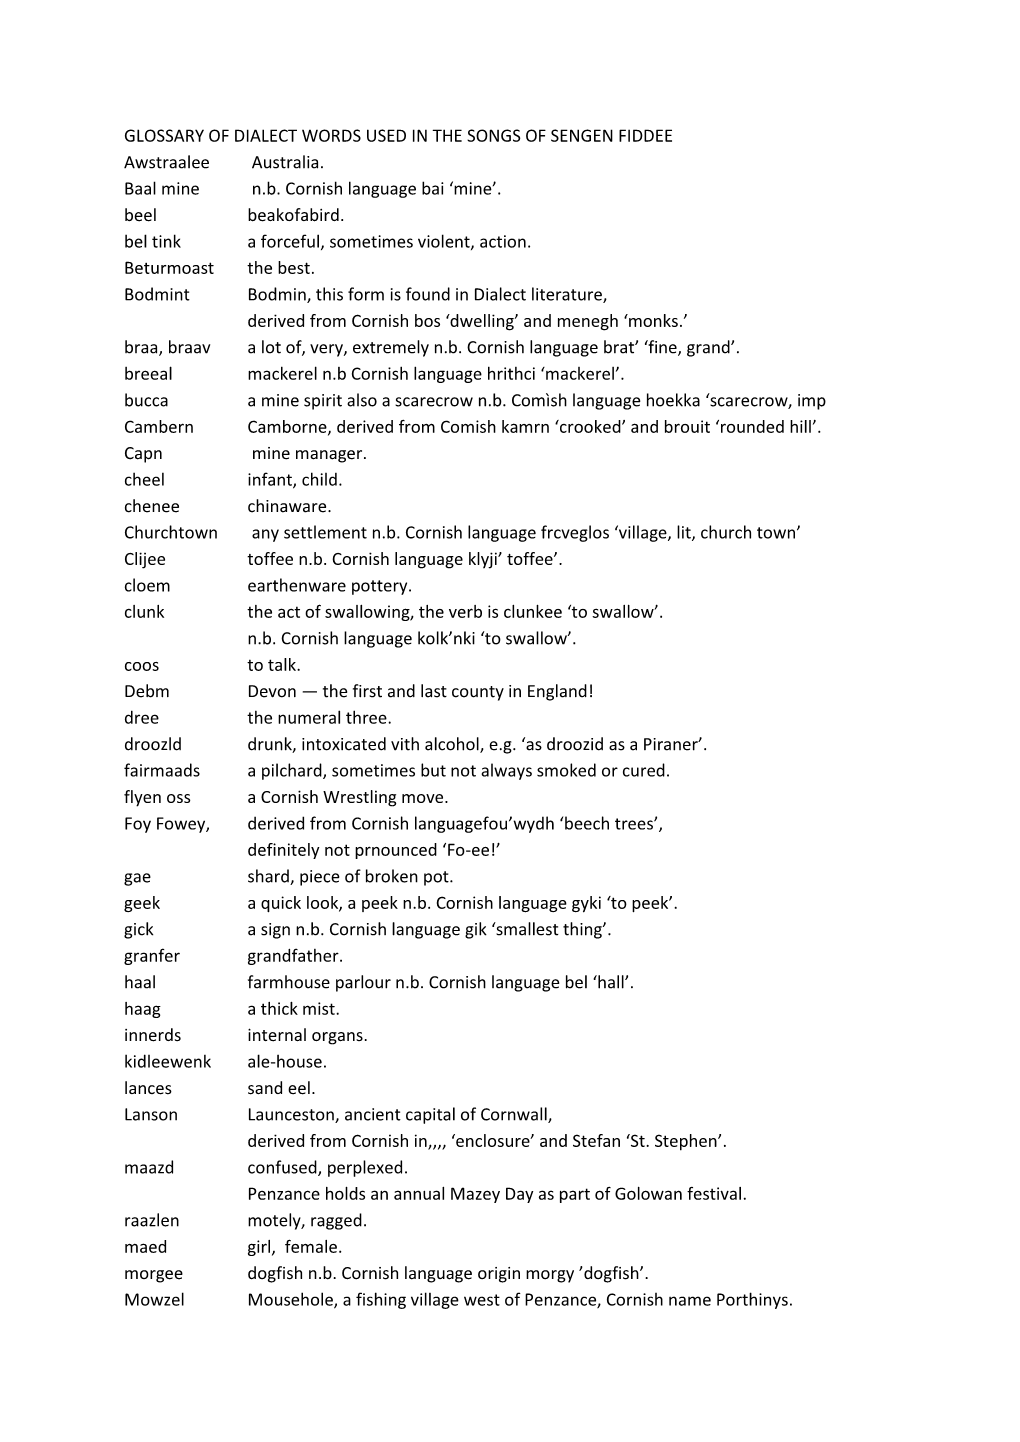 Glossary of Dialect Words Used in Sengen Fiddee